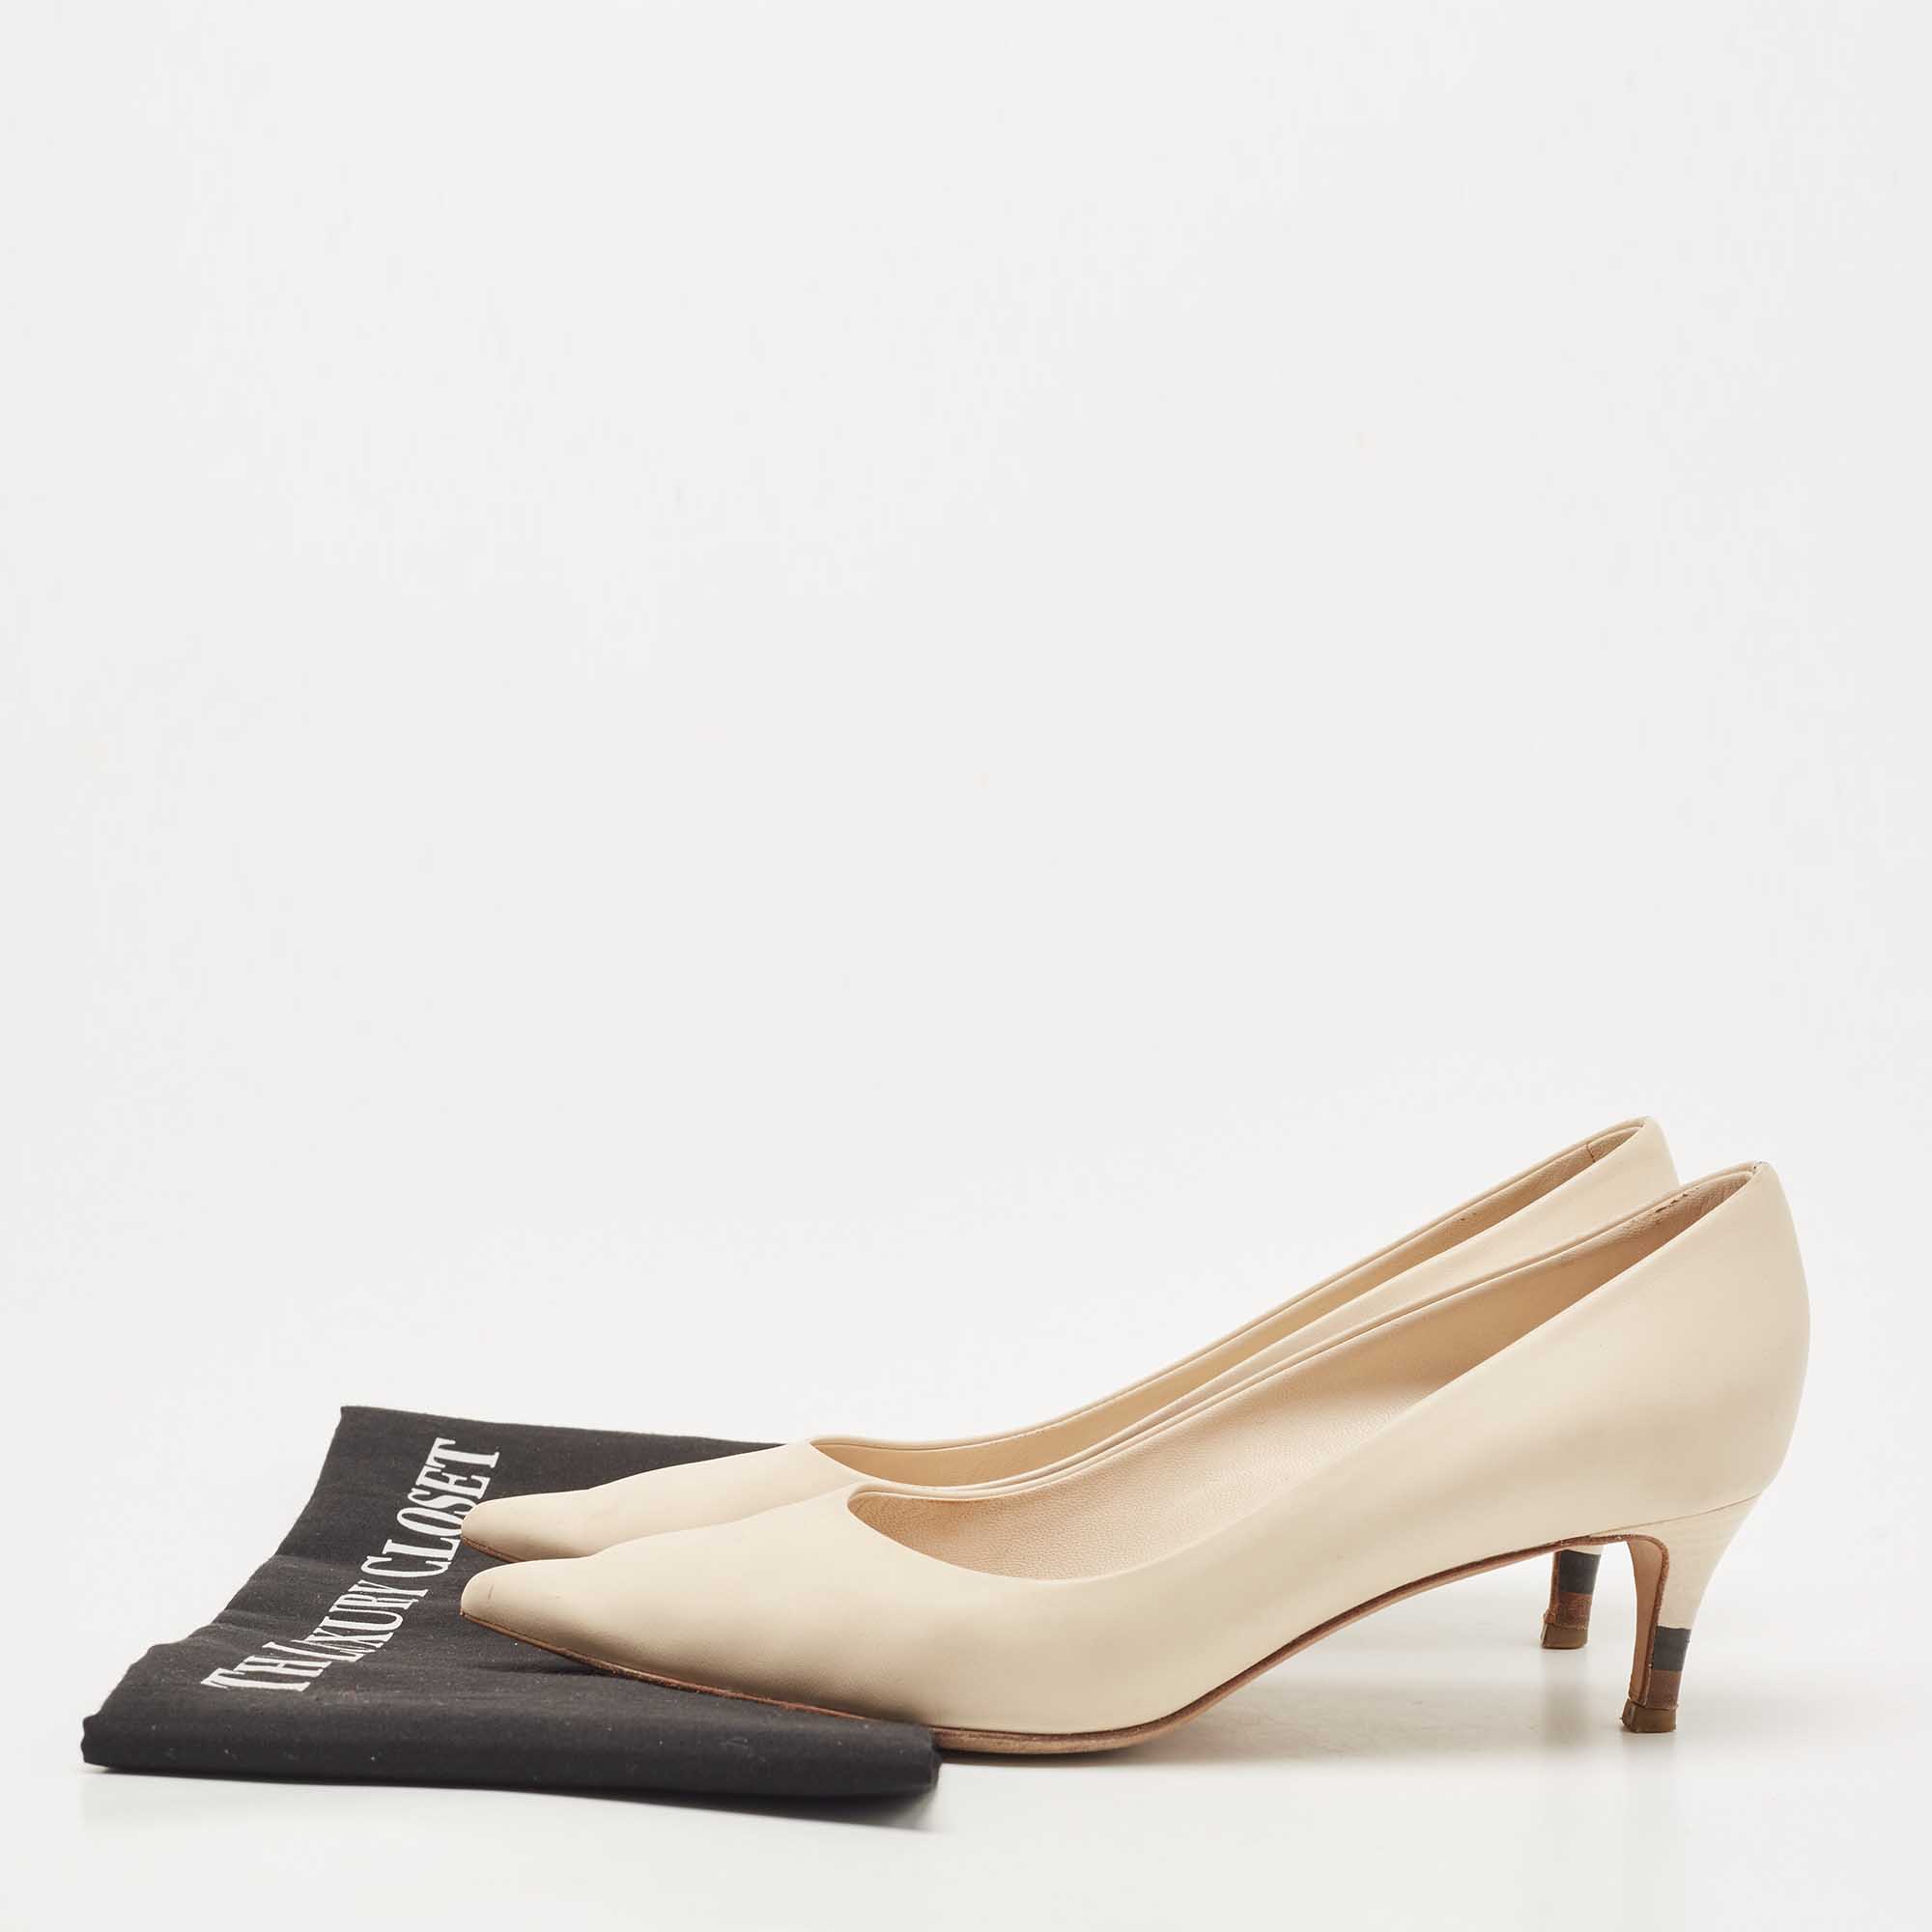 Fendi Beige Leather Pointed Toe Pumps Size 36